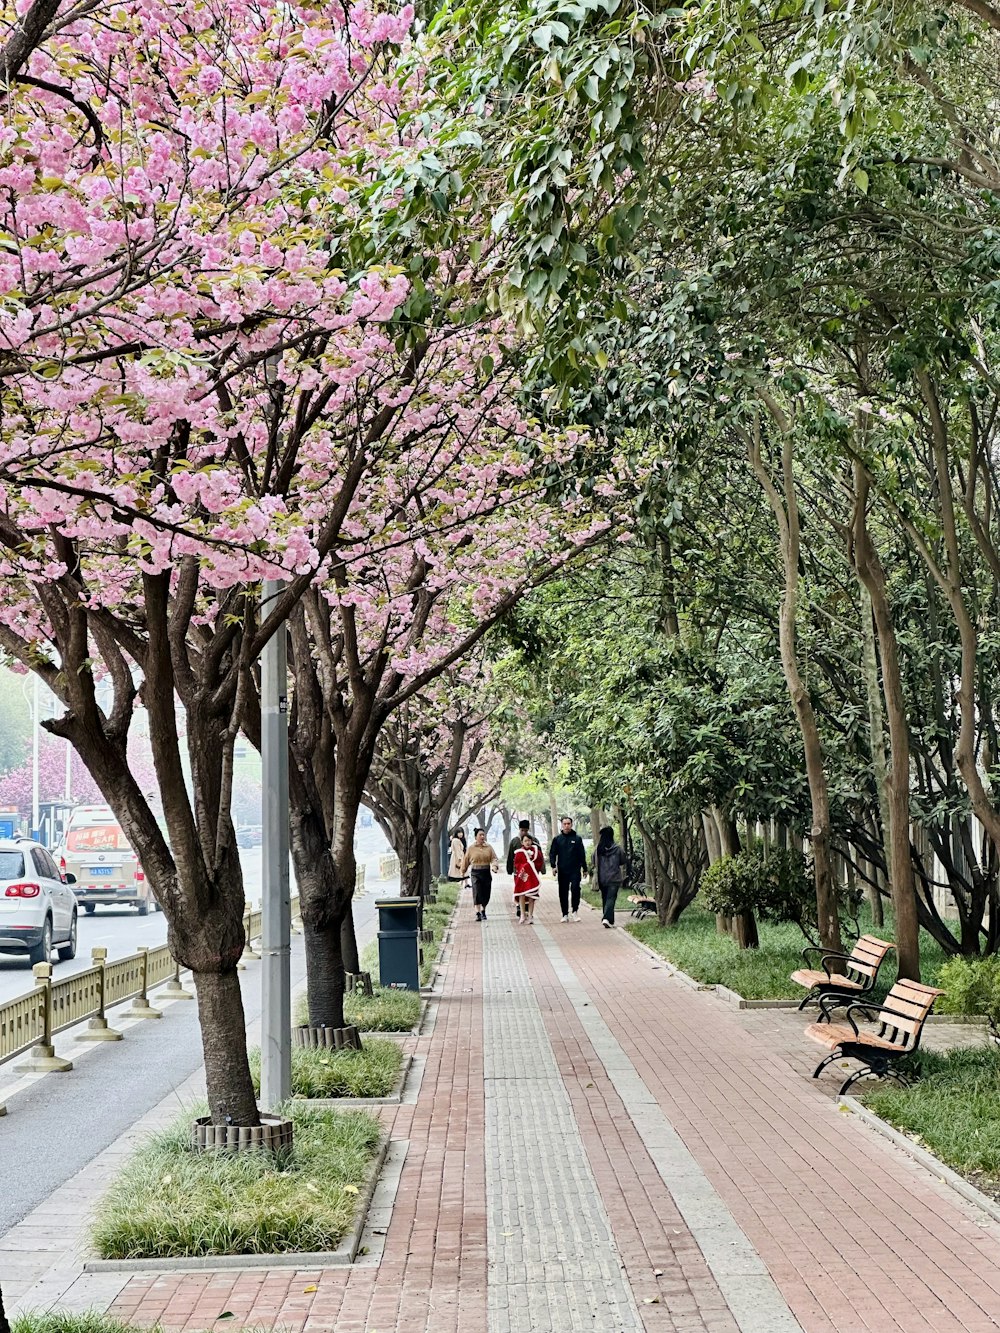 people walking down a sidewalk lined with trees